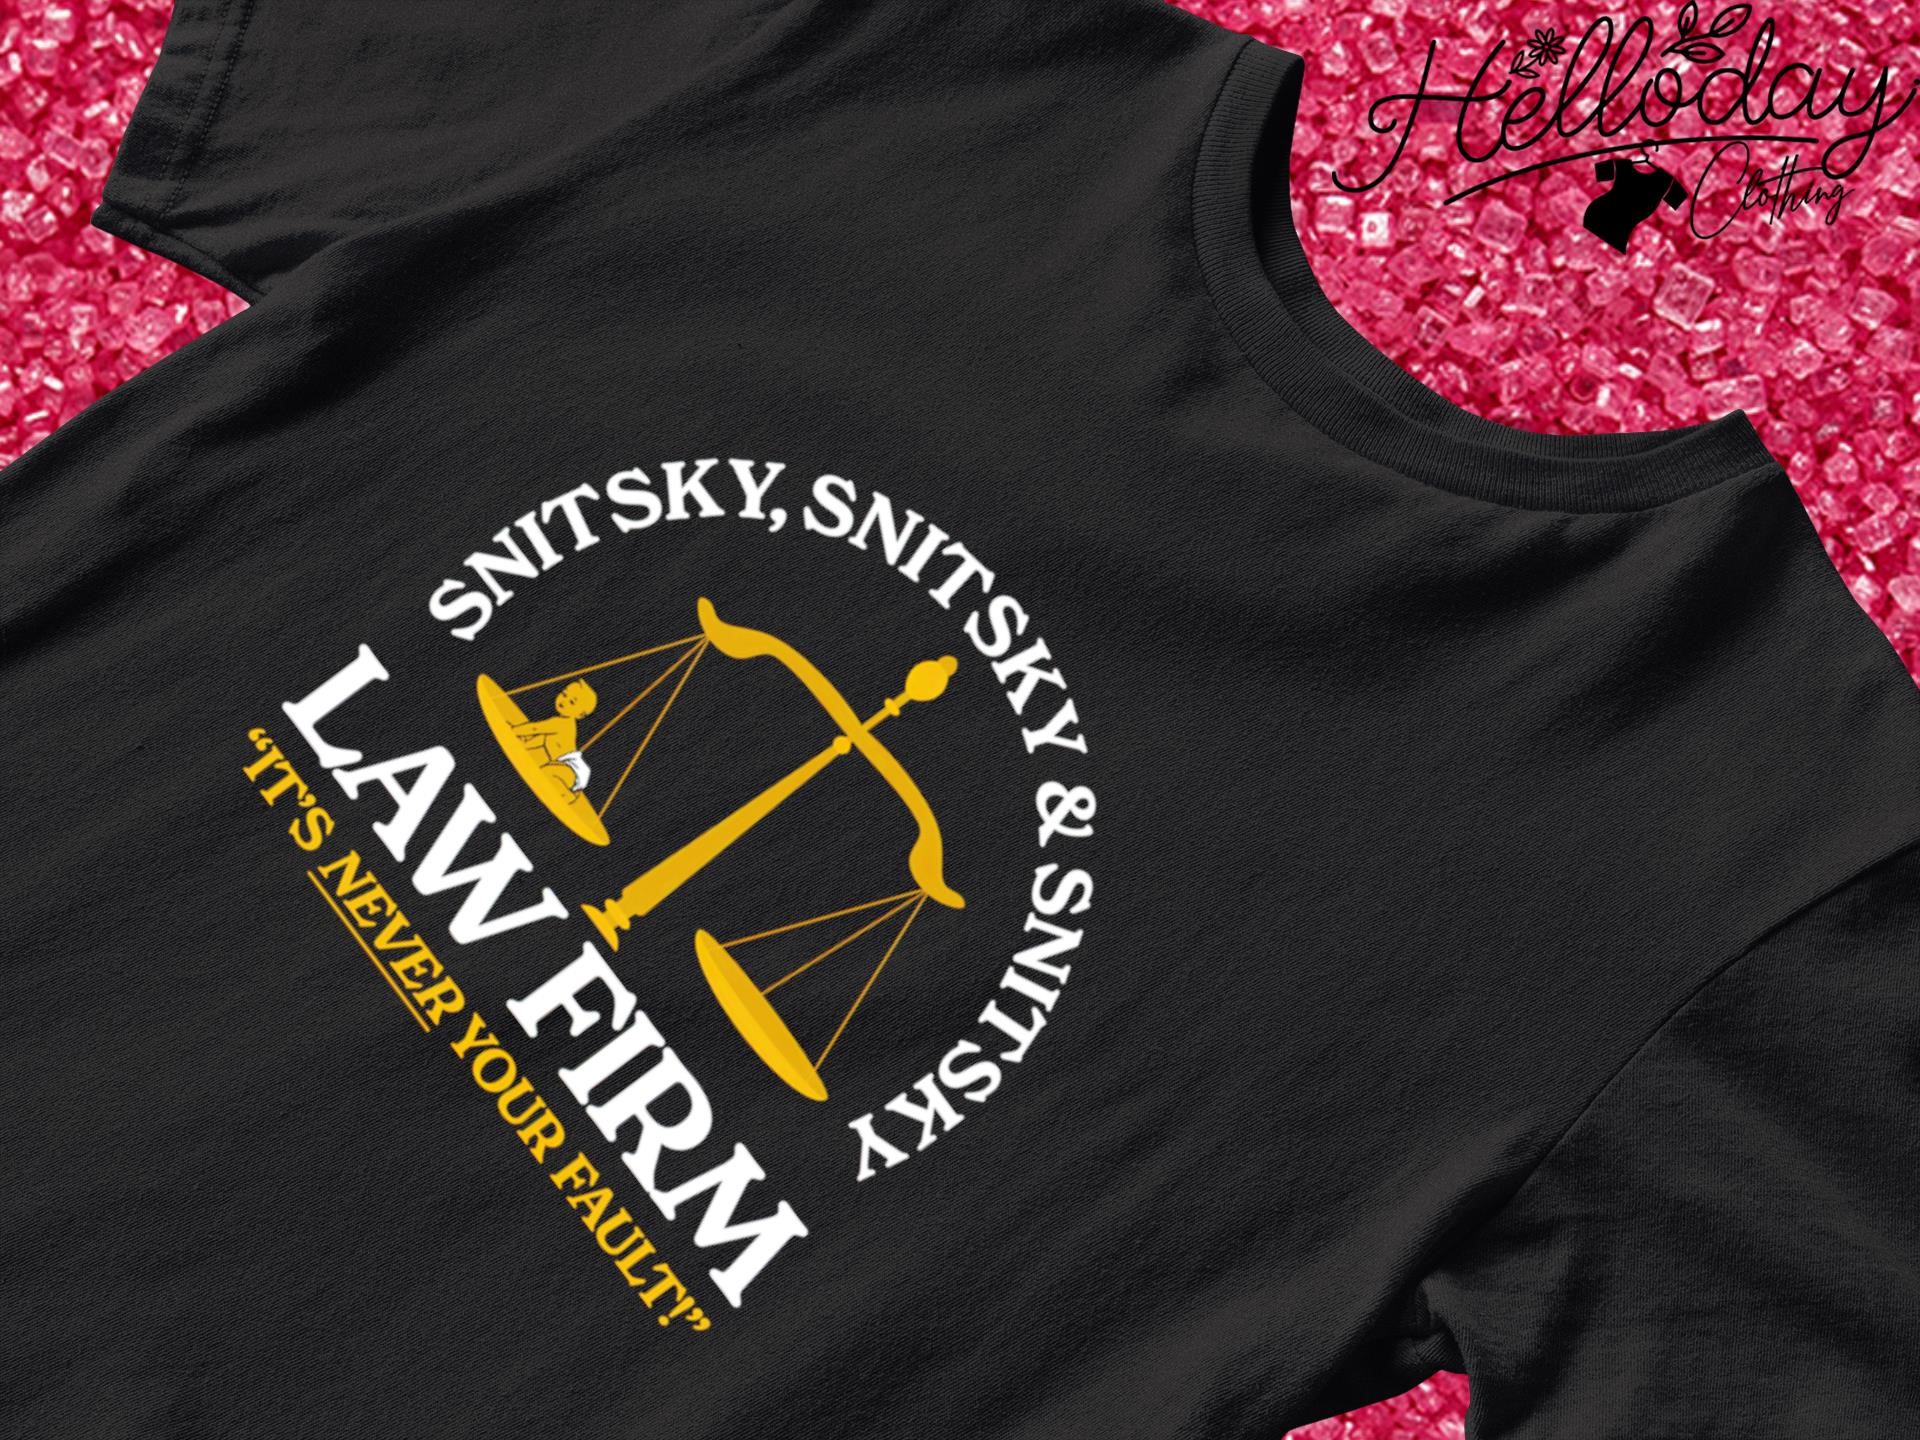 Snitsky Snitsky Law Firm it's never your fault shirt